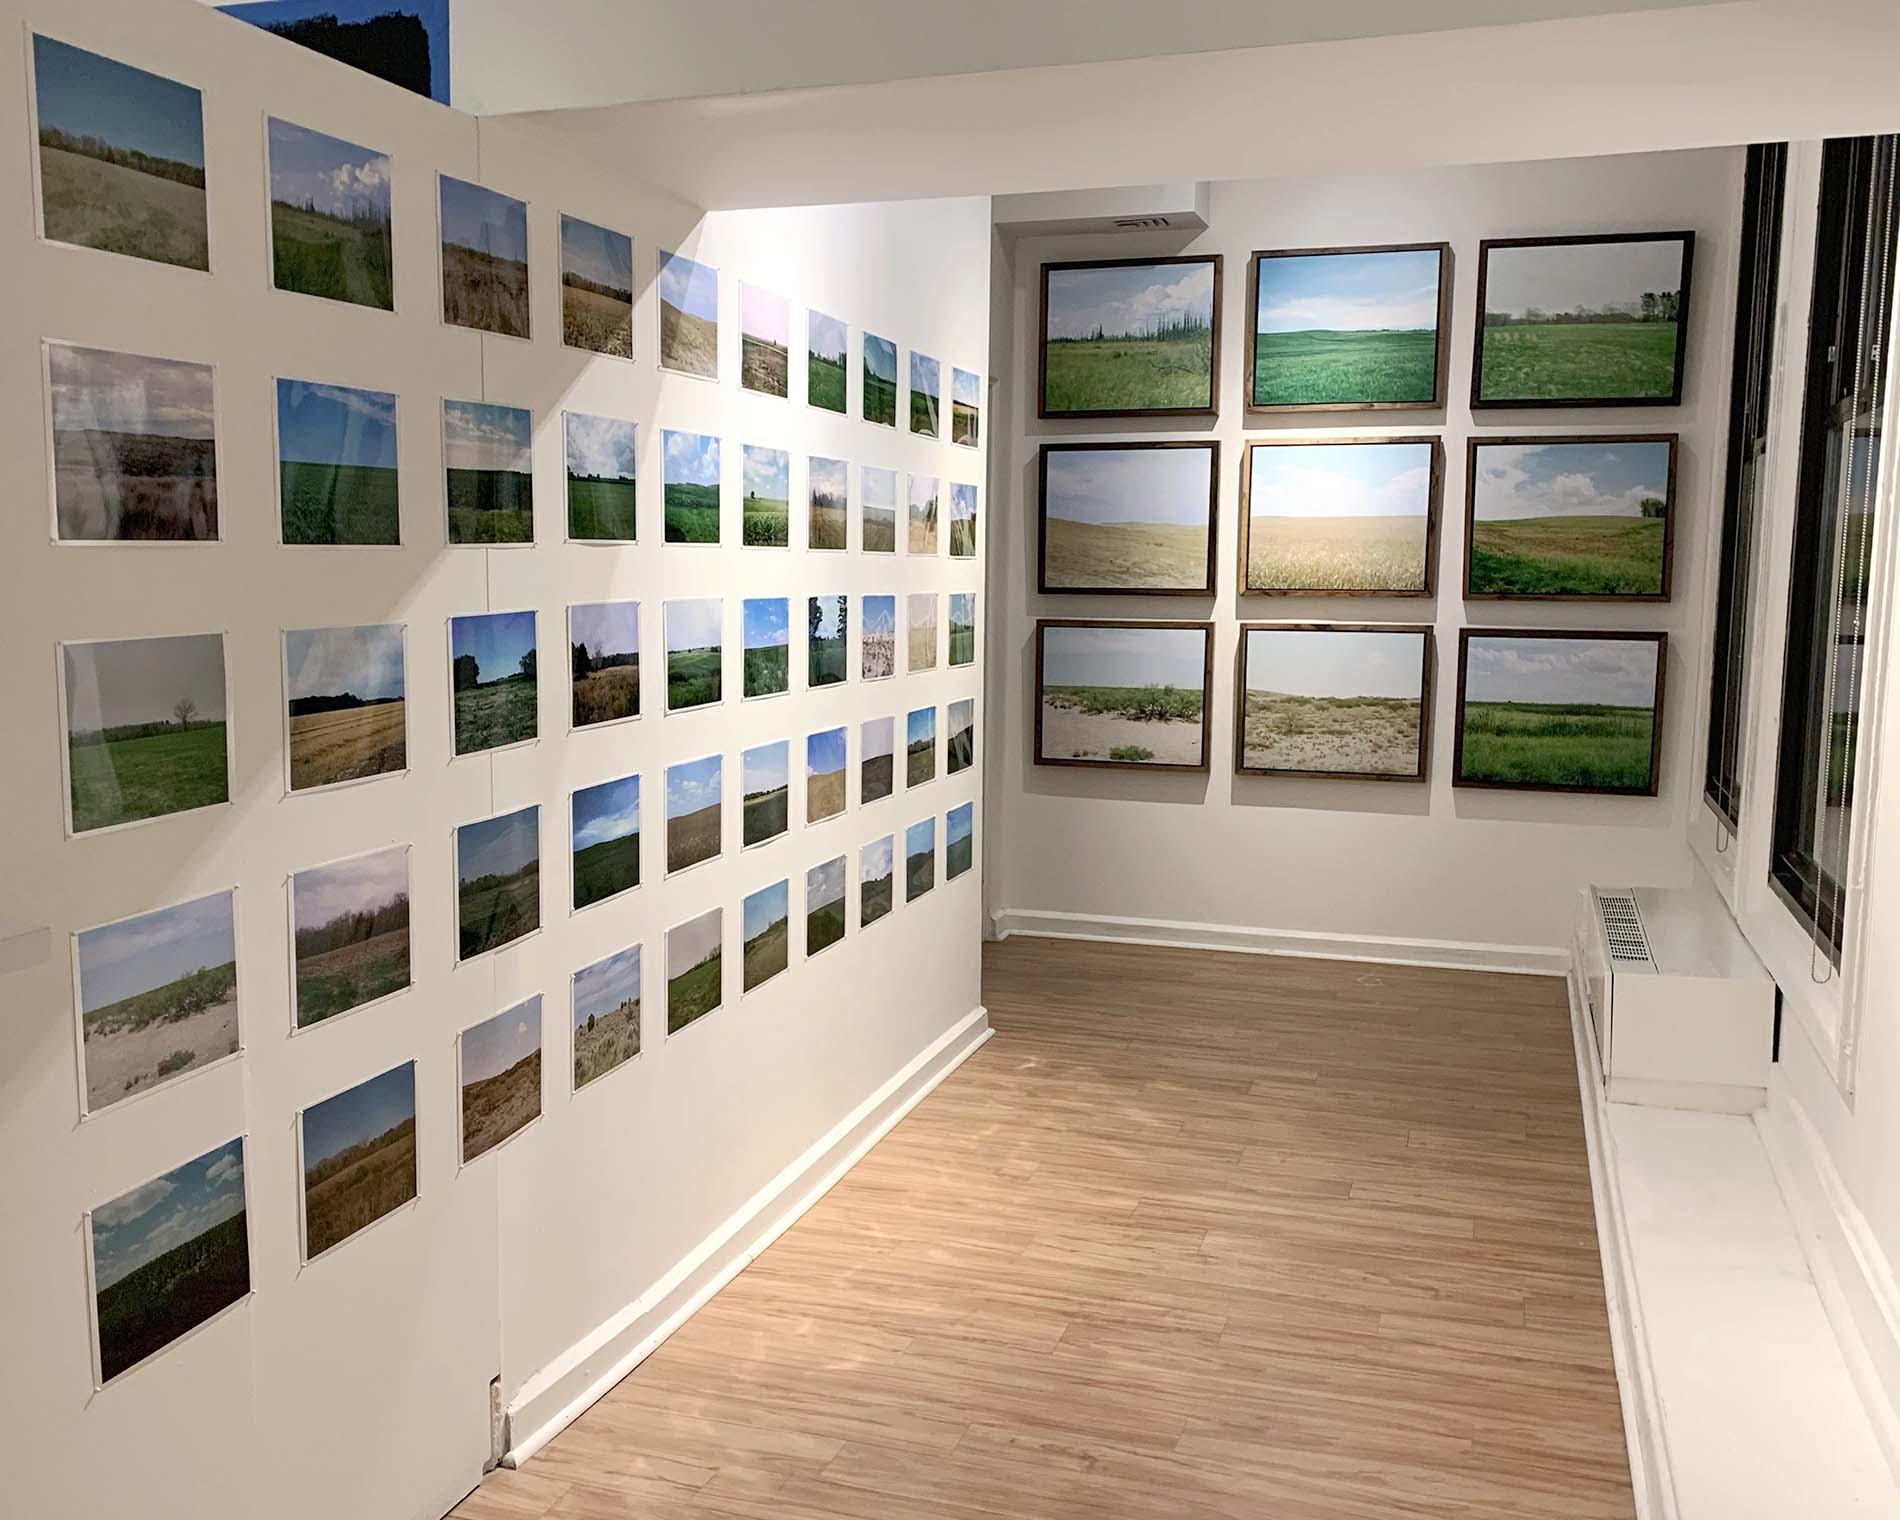 hallway with grid of similar images